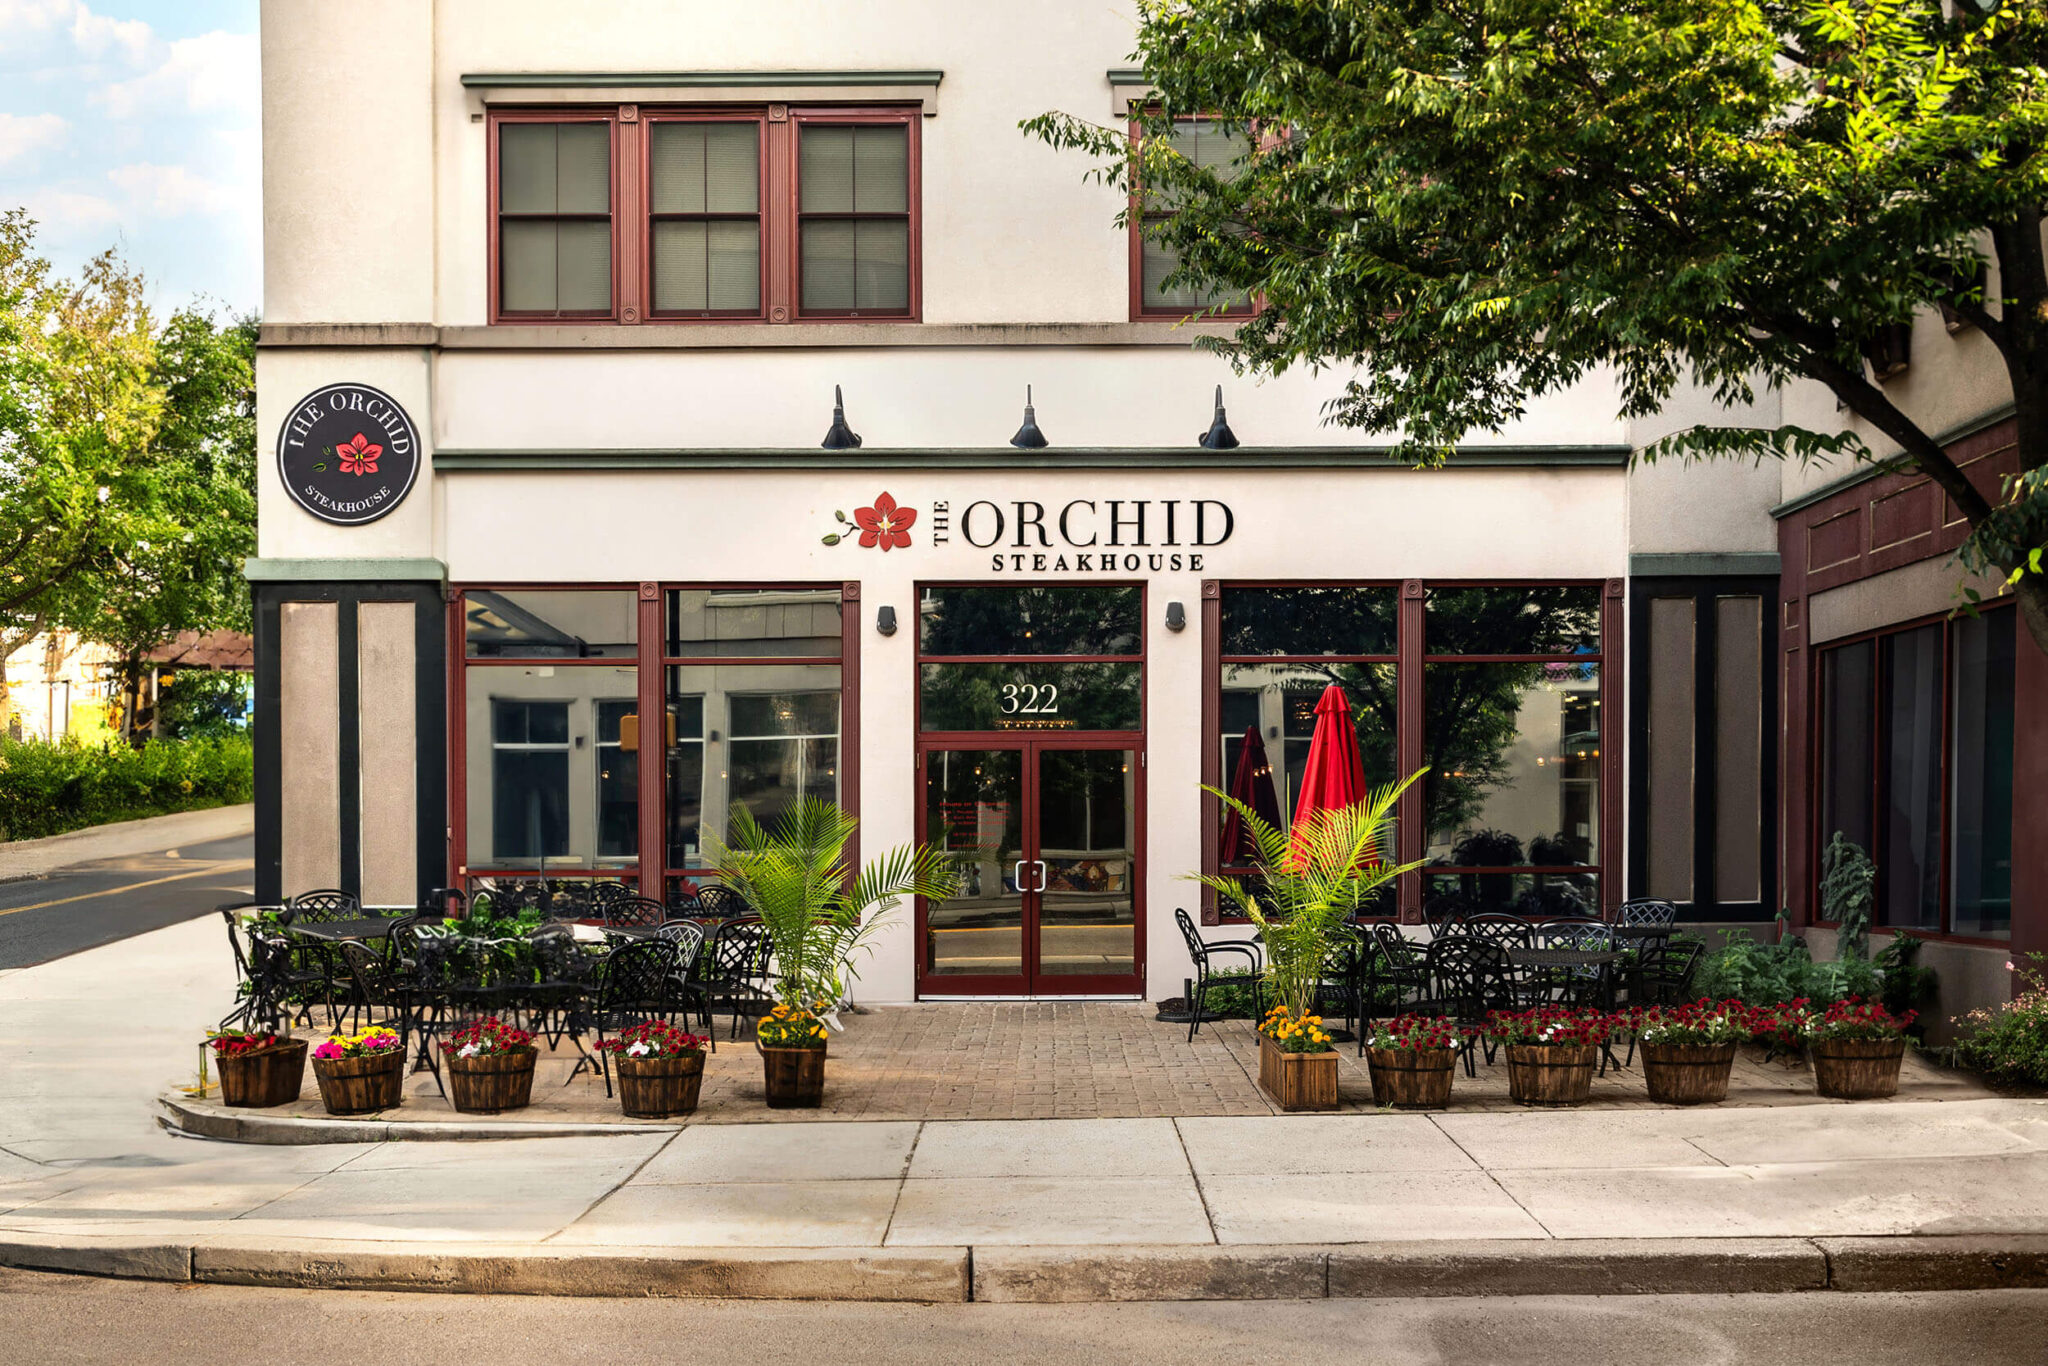 The Orchid Steakhouse 7 1 2048x1366 